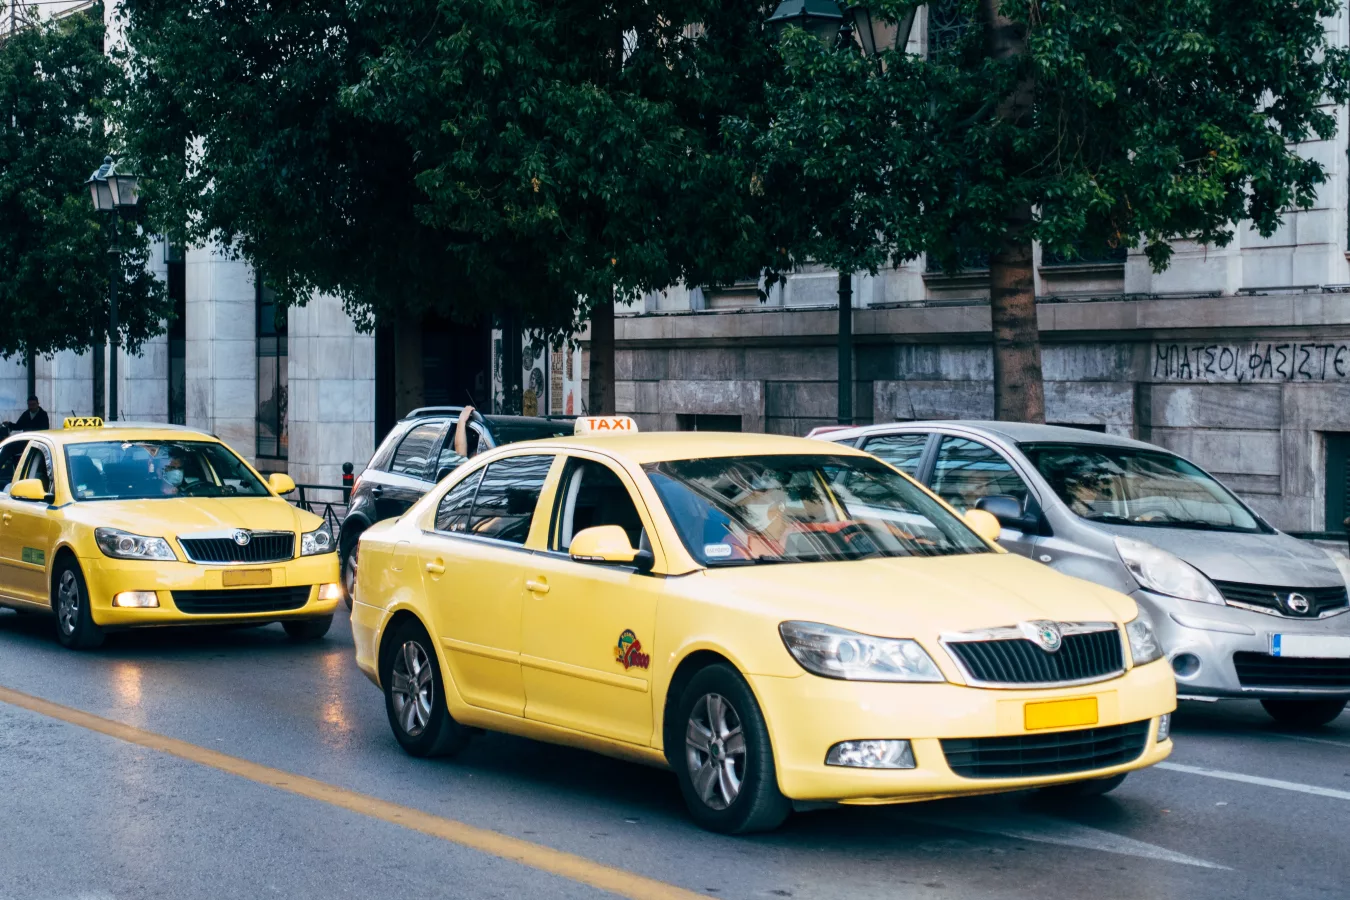 Greek taxi drivers in cabs.